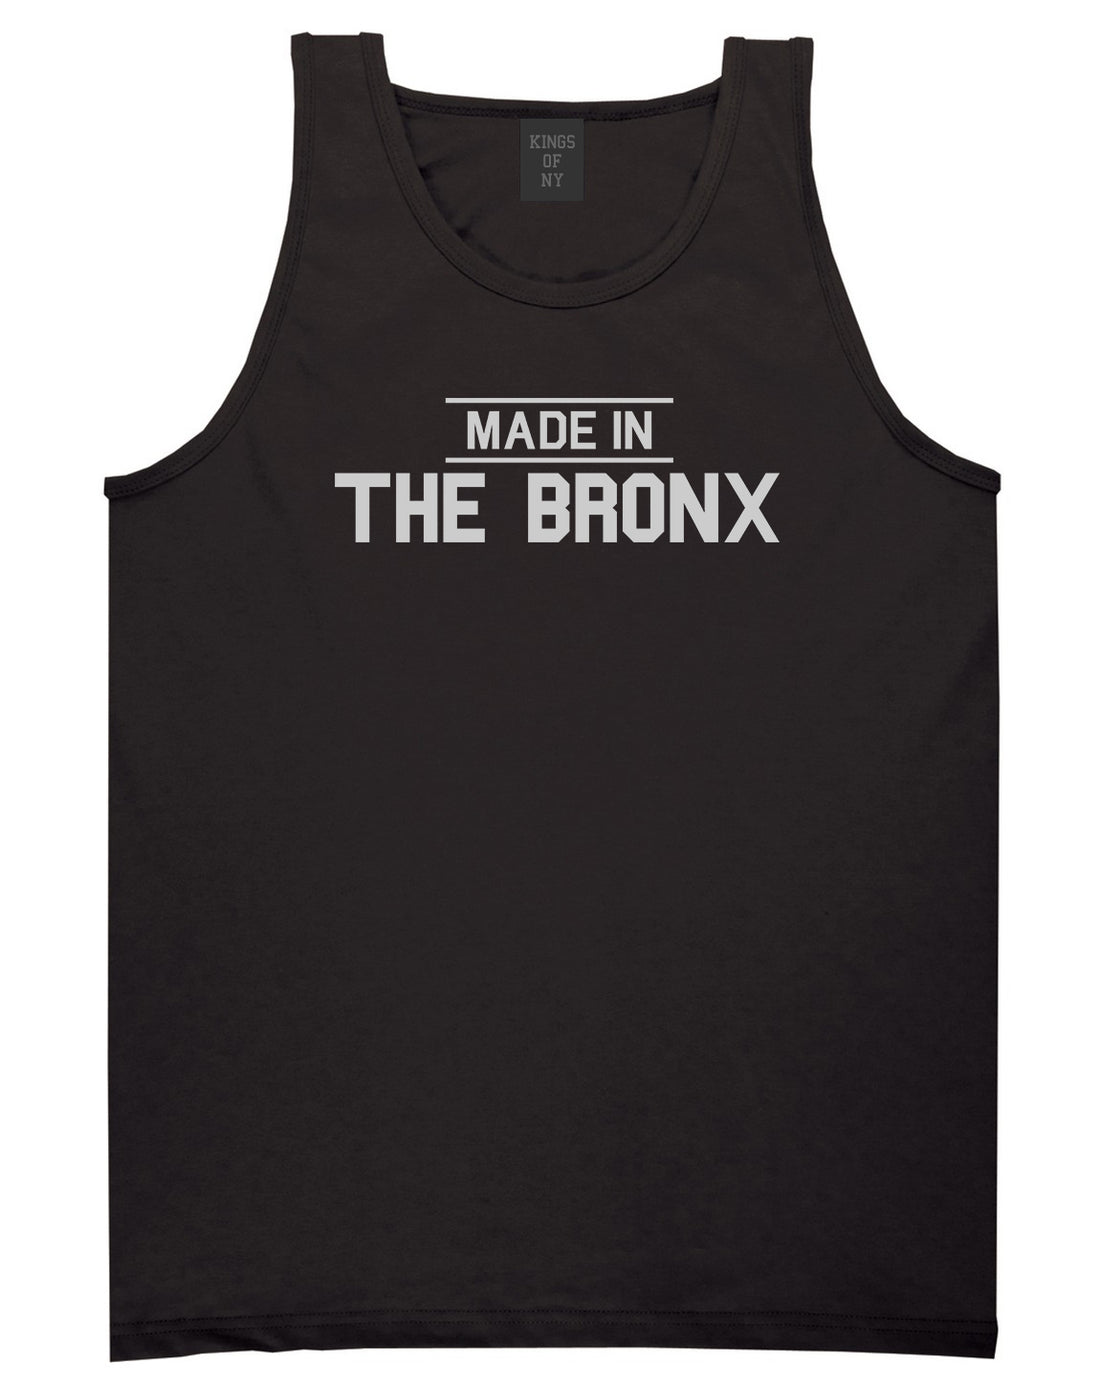 Made In The Bronx Mens Tank Top Shirt Black by Kings Of NY